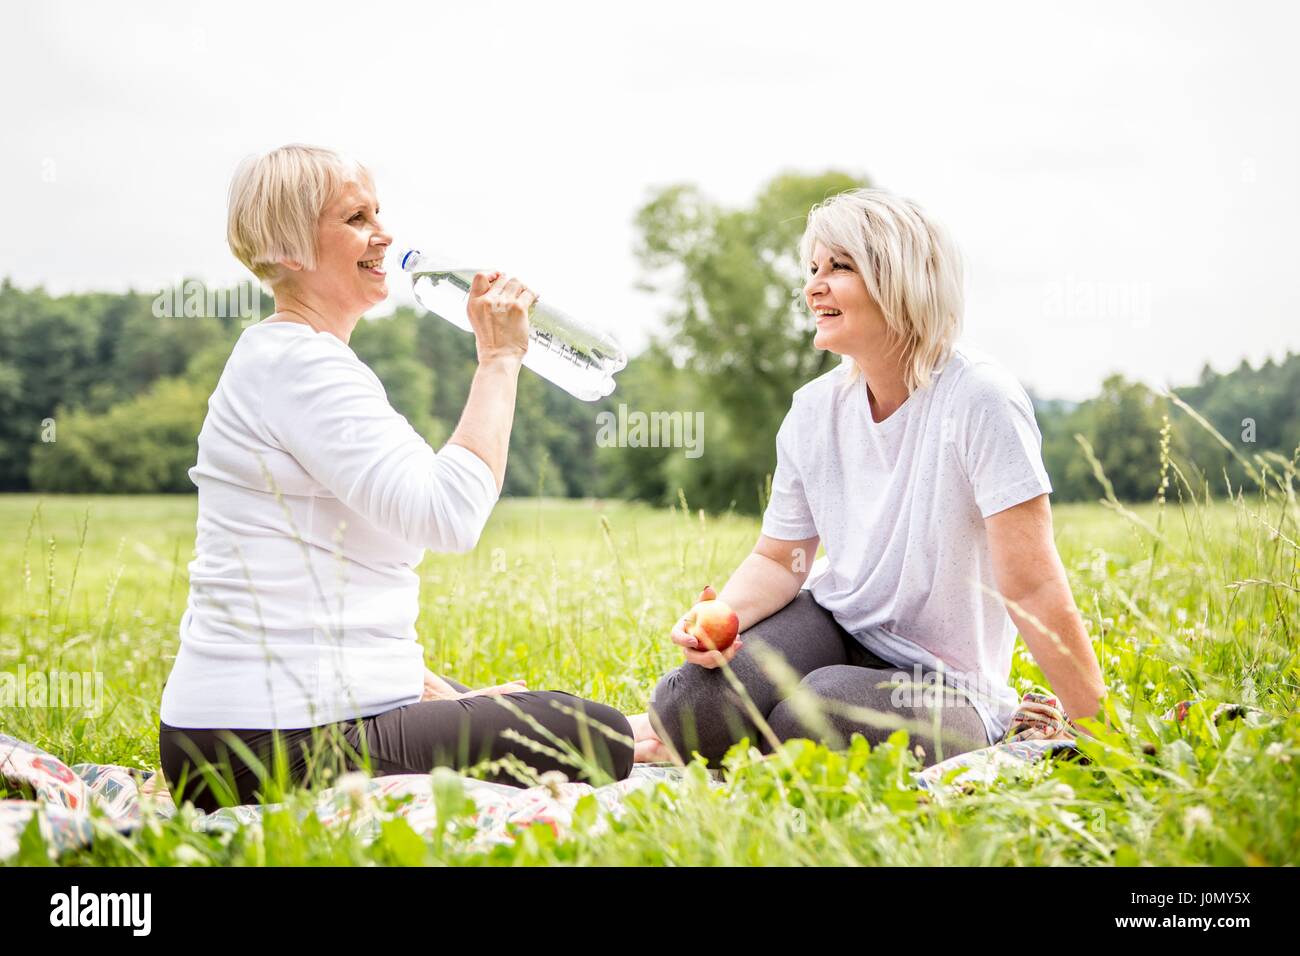 Two women sitting on grass, one drinking water. Stock Photo